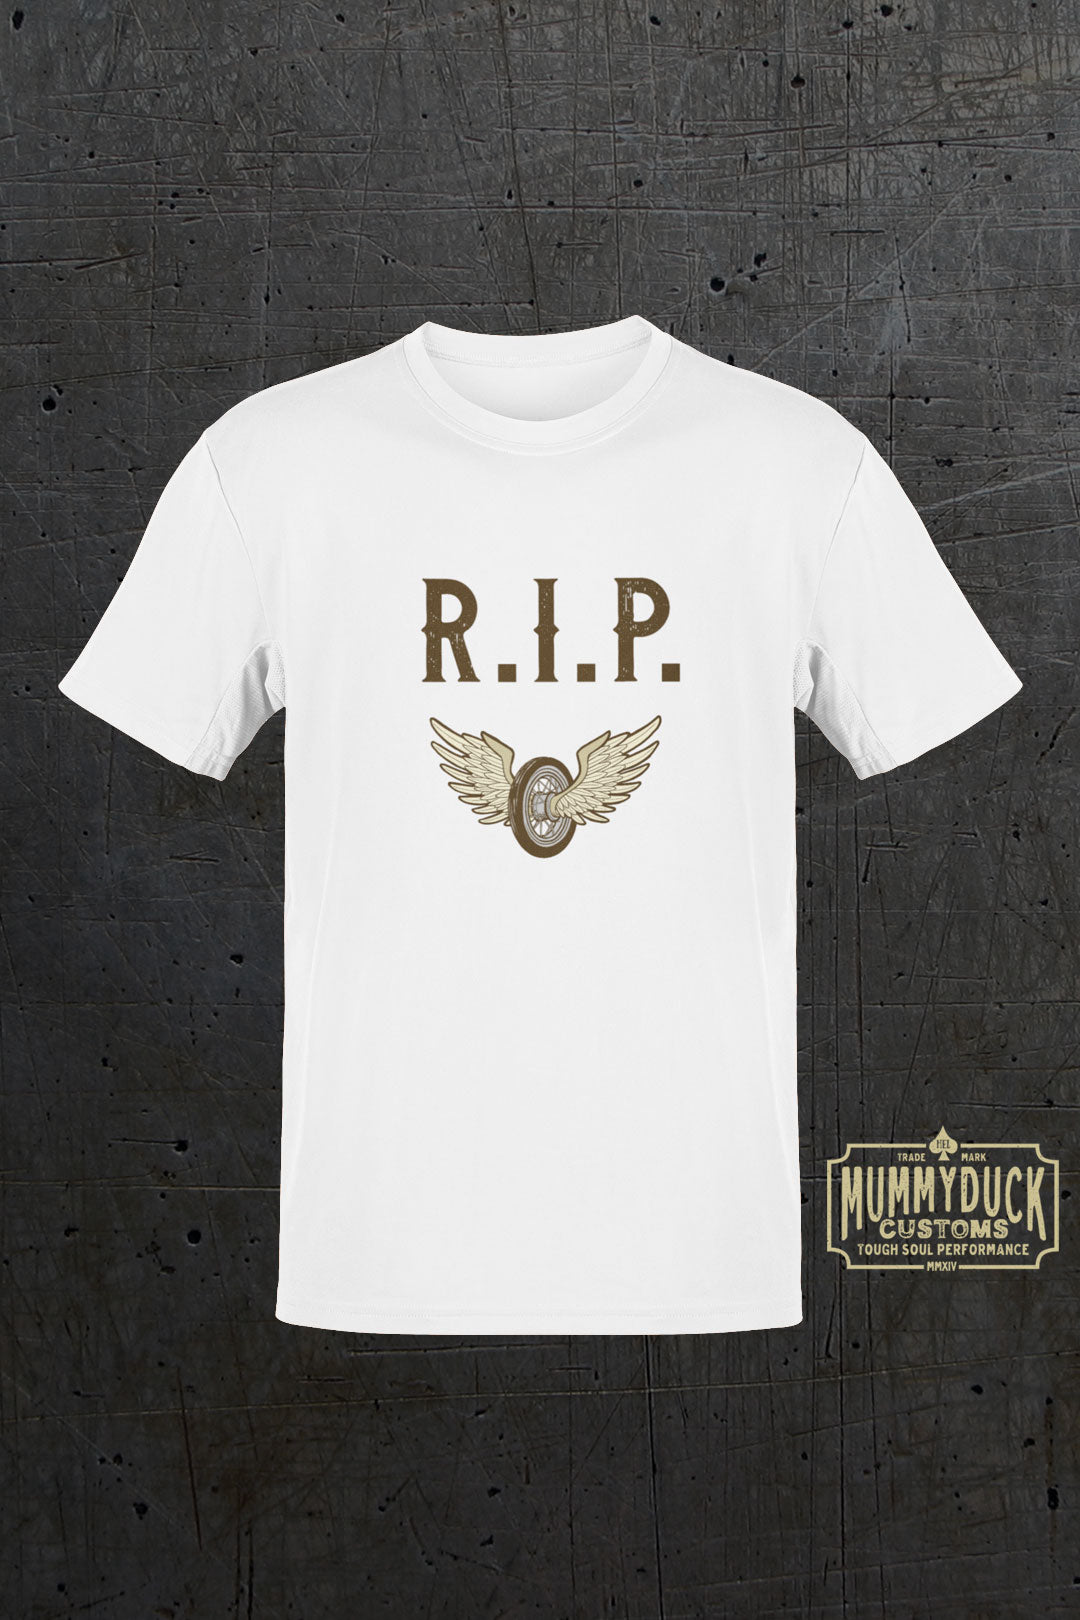 R.I.P. t-shirt For Motorcyclists